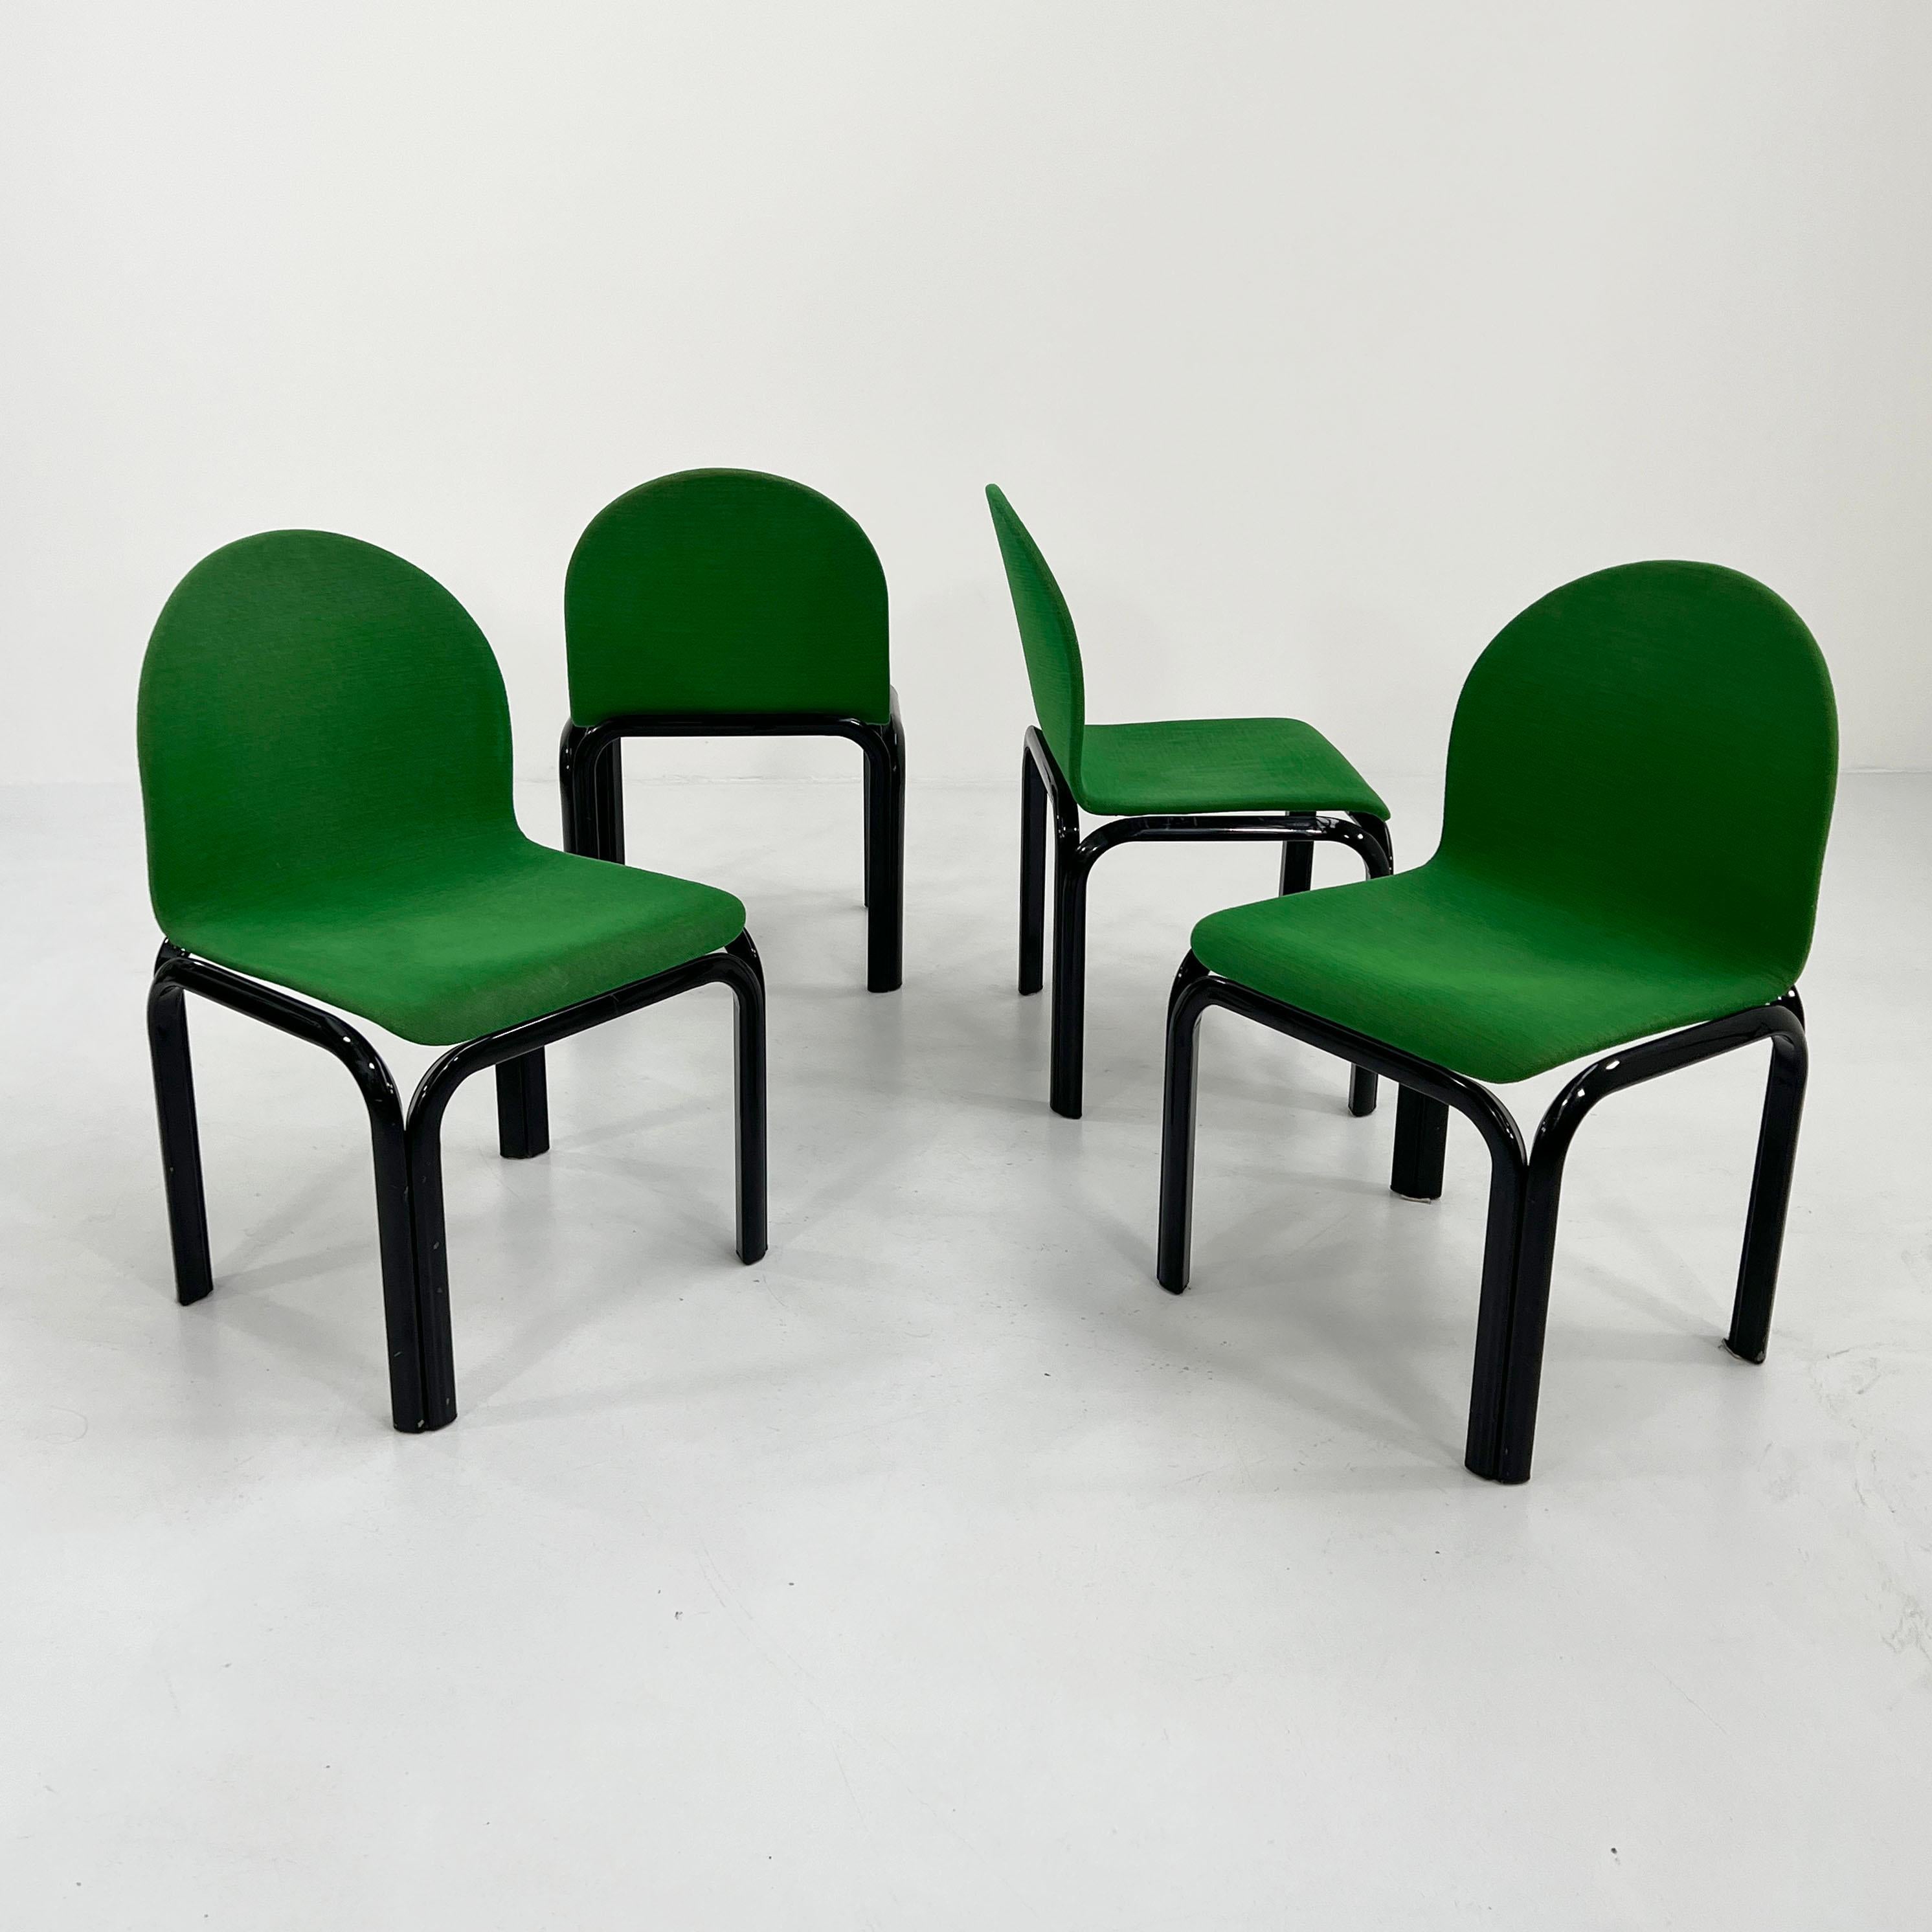 Designer - Gae Aulenti
Producer - Knoll
Model - Orsay Dining Chairs
Design Period - Seventies 
Measurements - Width 57 cm x Depth 47 cm x Height 83 cm x Seat Height 45 cm
Materials - Metal, Fabric 
Color - Green, Black
Comments - Light wear